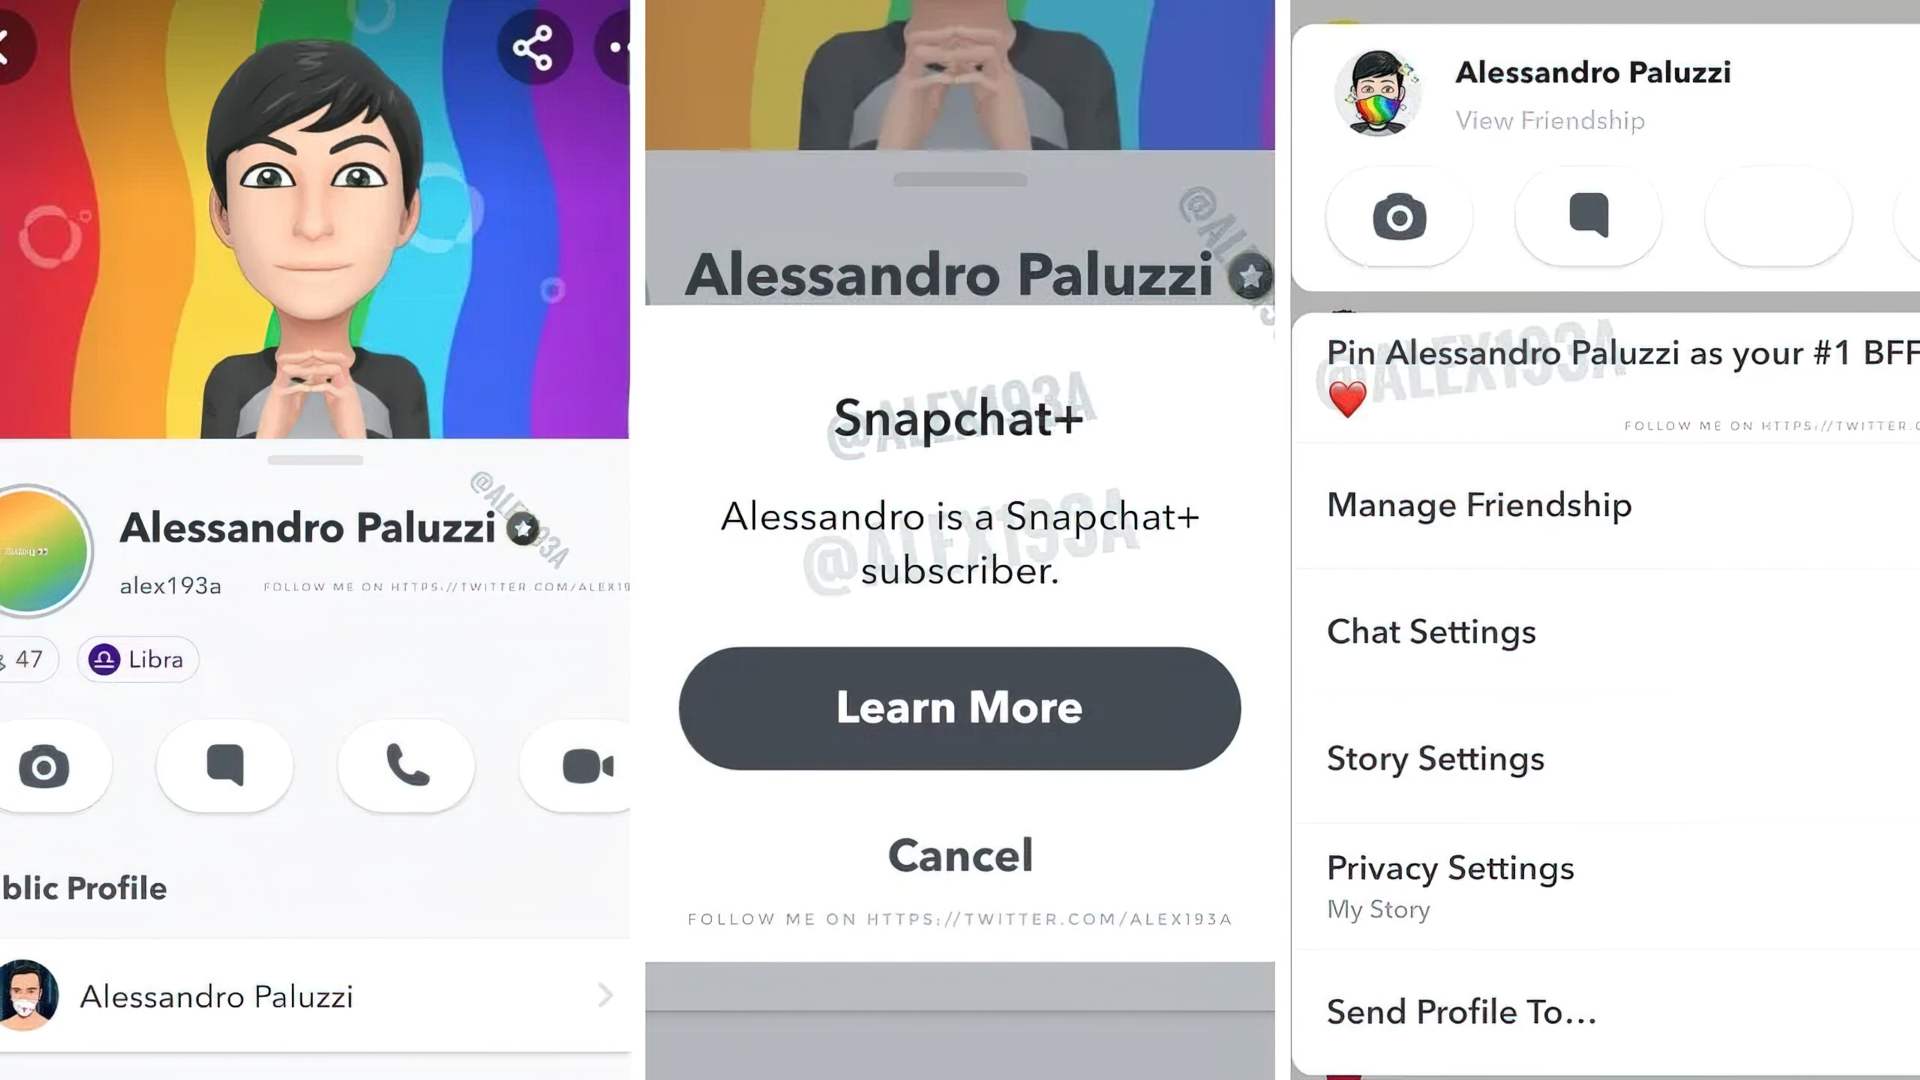 To access exclusive in-app features, users will now be able to subscribe to Snapchat Plus service and in this article we'll detail Snapchat subscriptions and how to get Snapchat Plus.